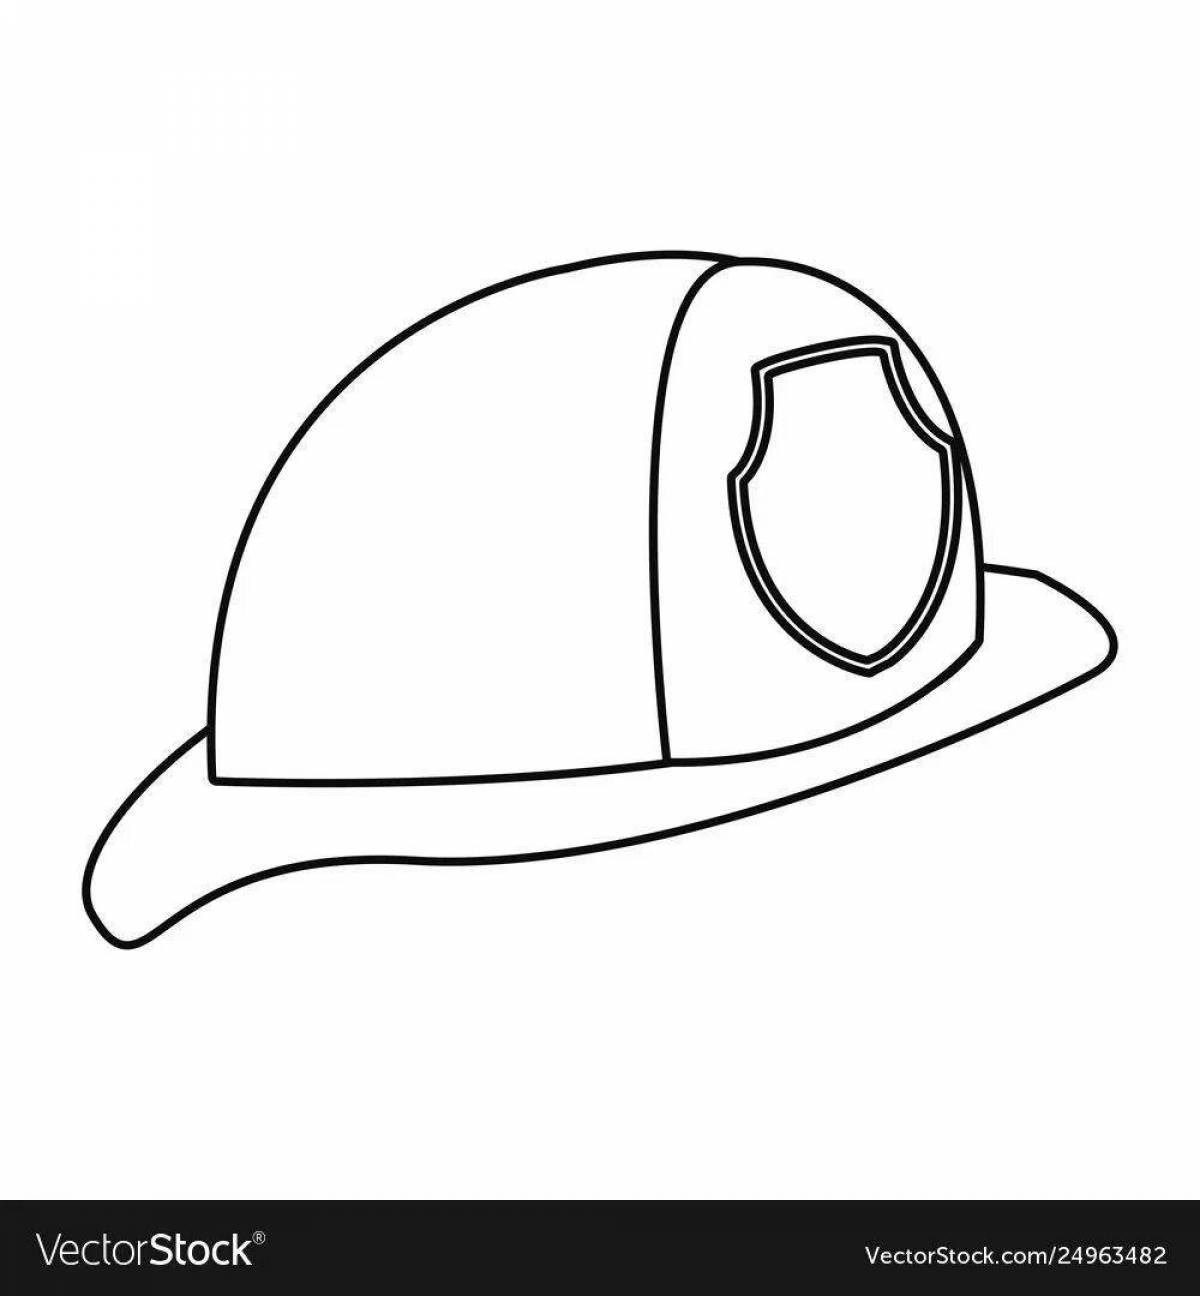 Mysterious helmet coloring page